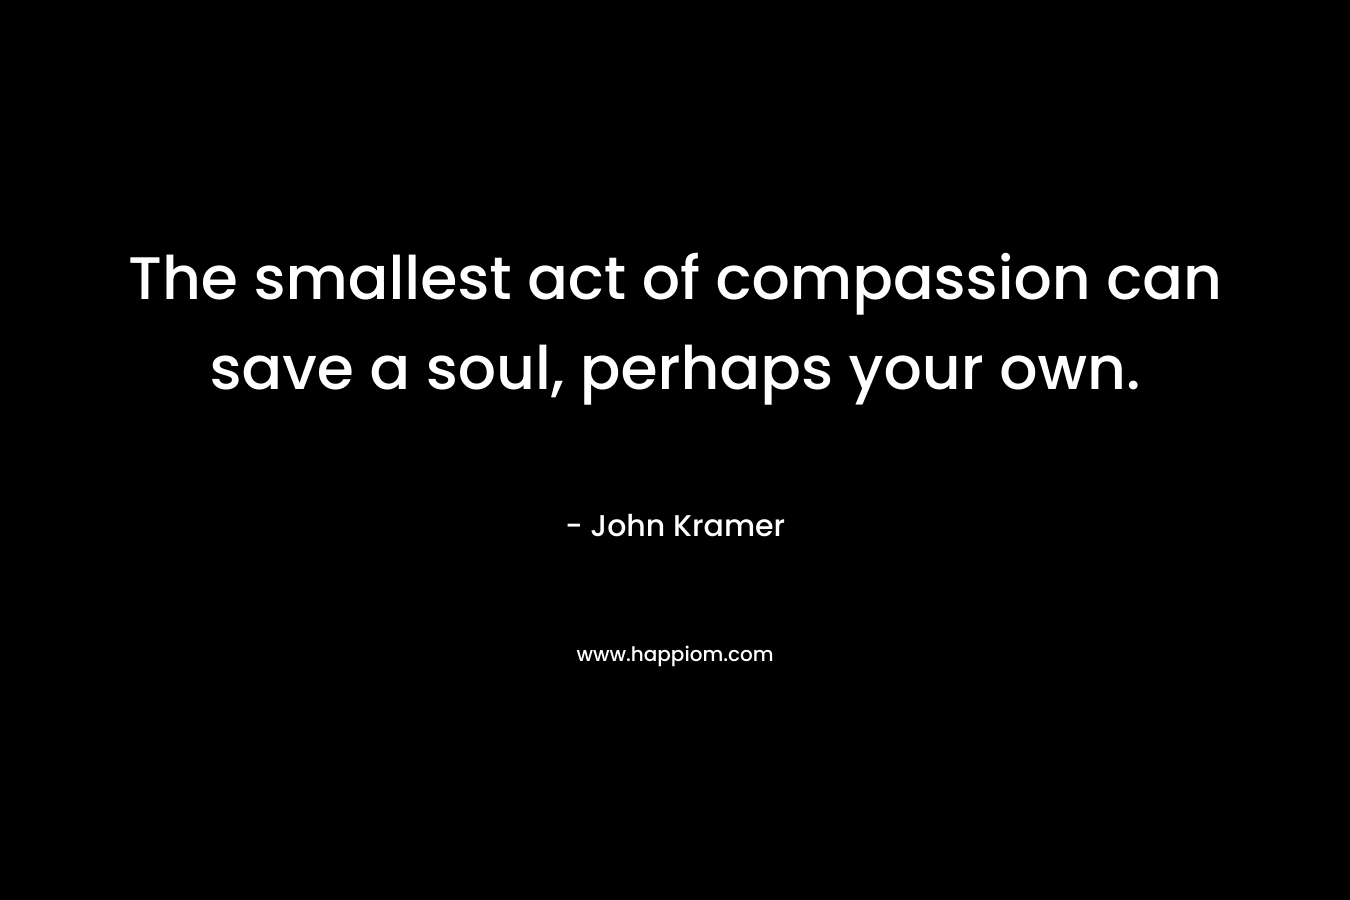 The smallest act of compassion can save a soul, perhaps your own.